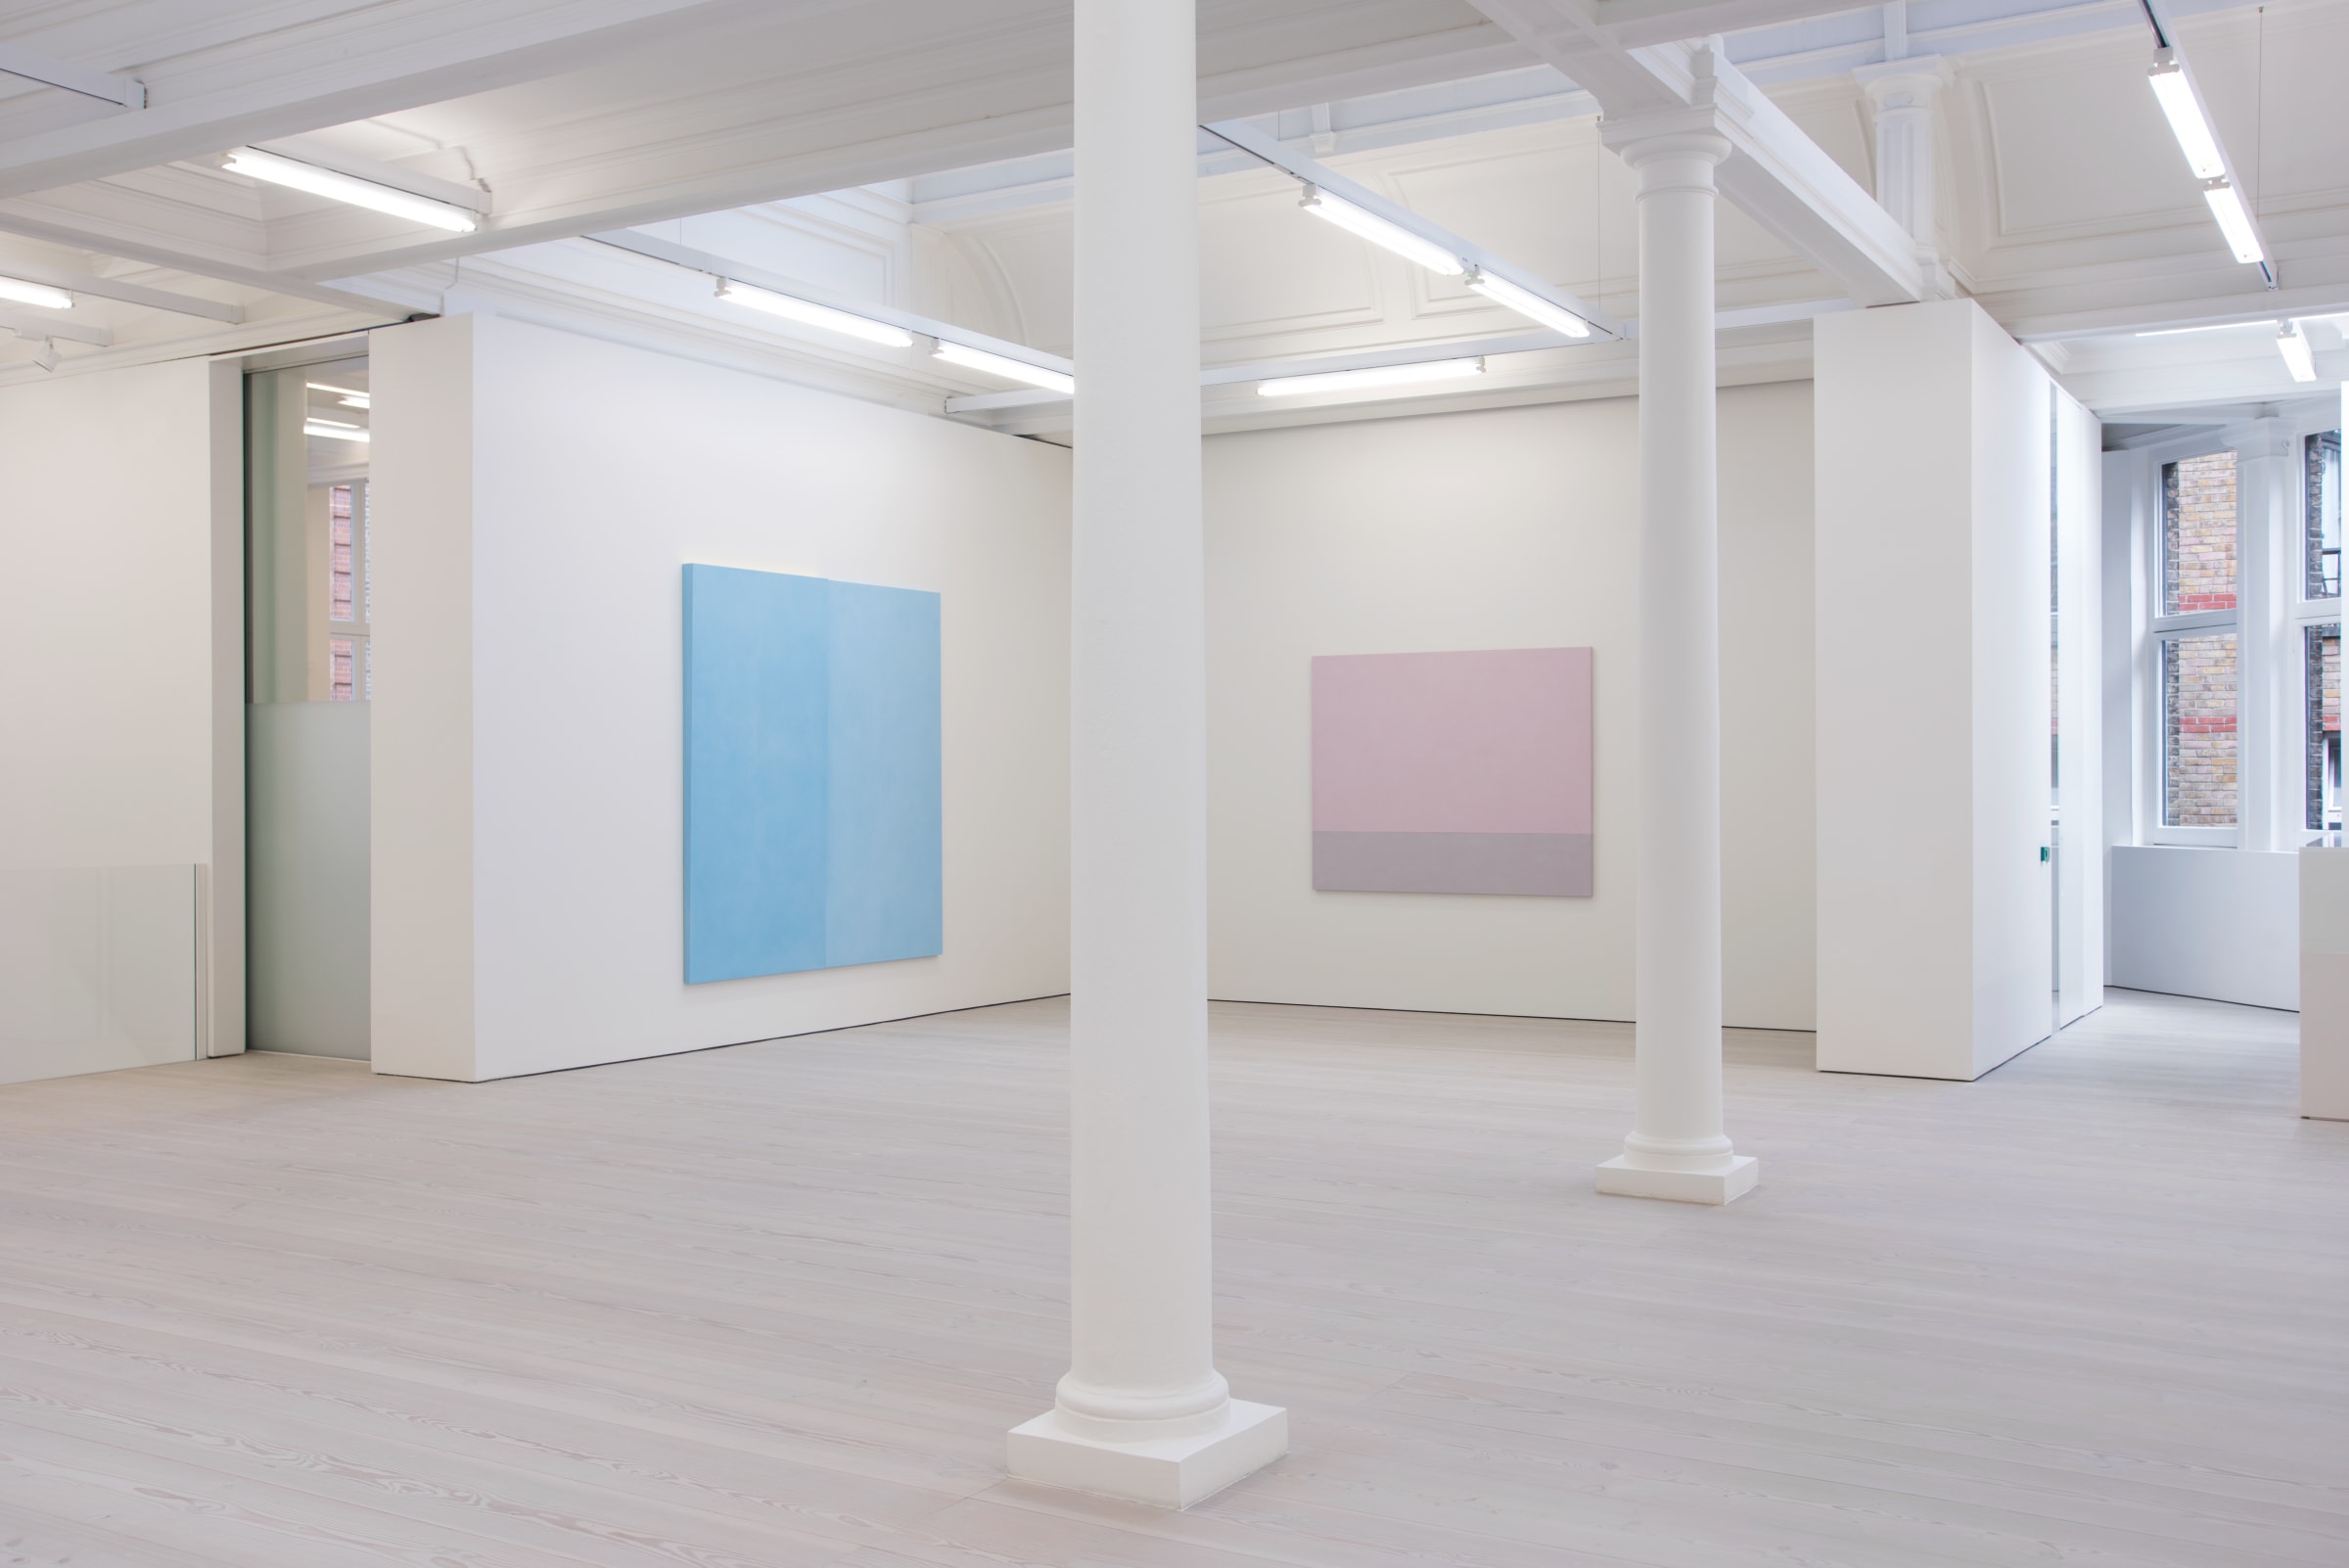 In a white gallery space with columns and a window to the left, two paintings hang: one light blue on the left wall, and one light pink straight ahead.